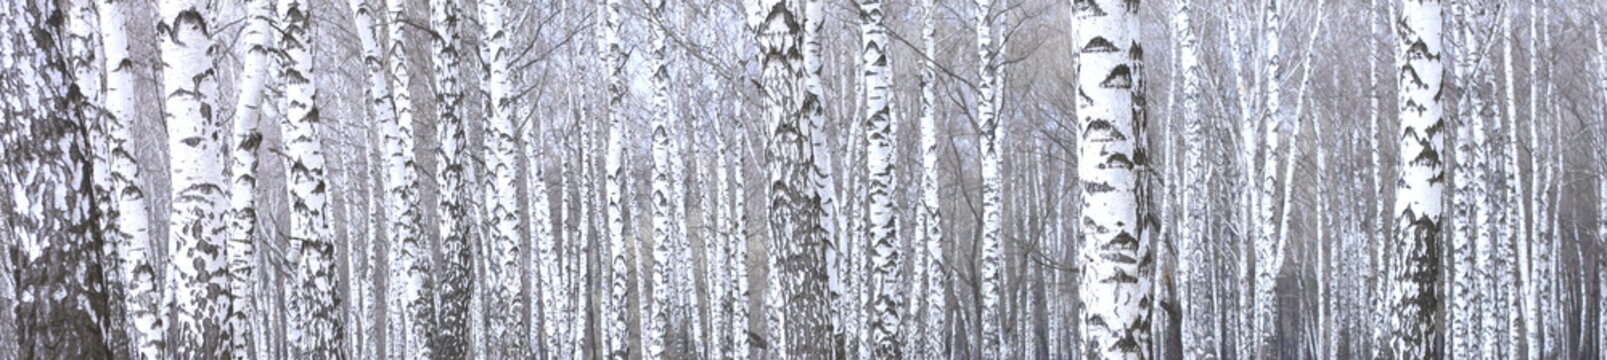 Fototapeta panoramic photo of beautiful scene with birches in autumn birch forest in november among other birches in birch grove